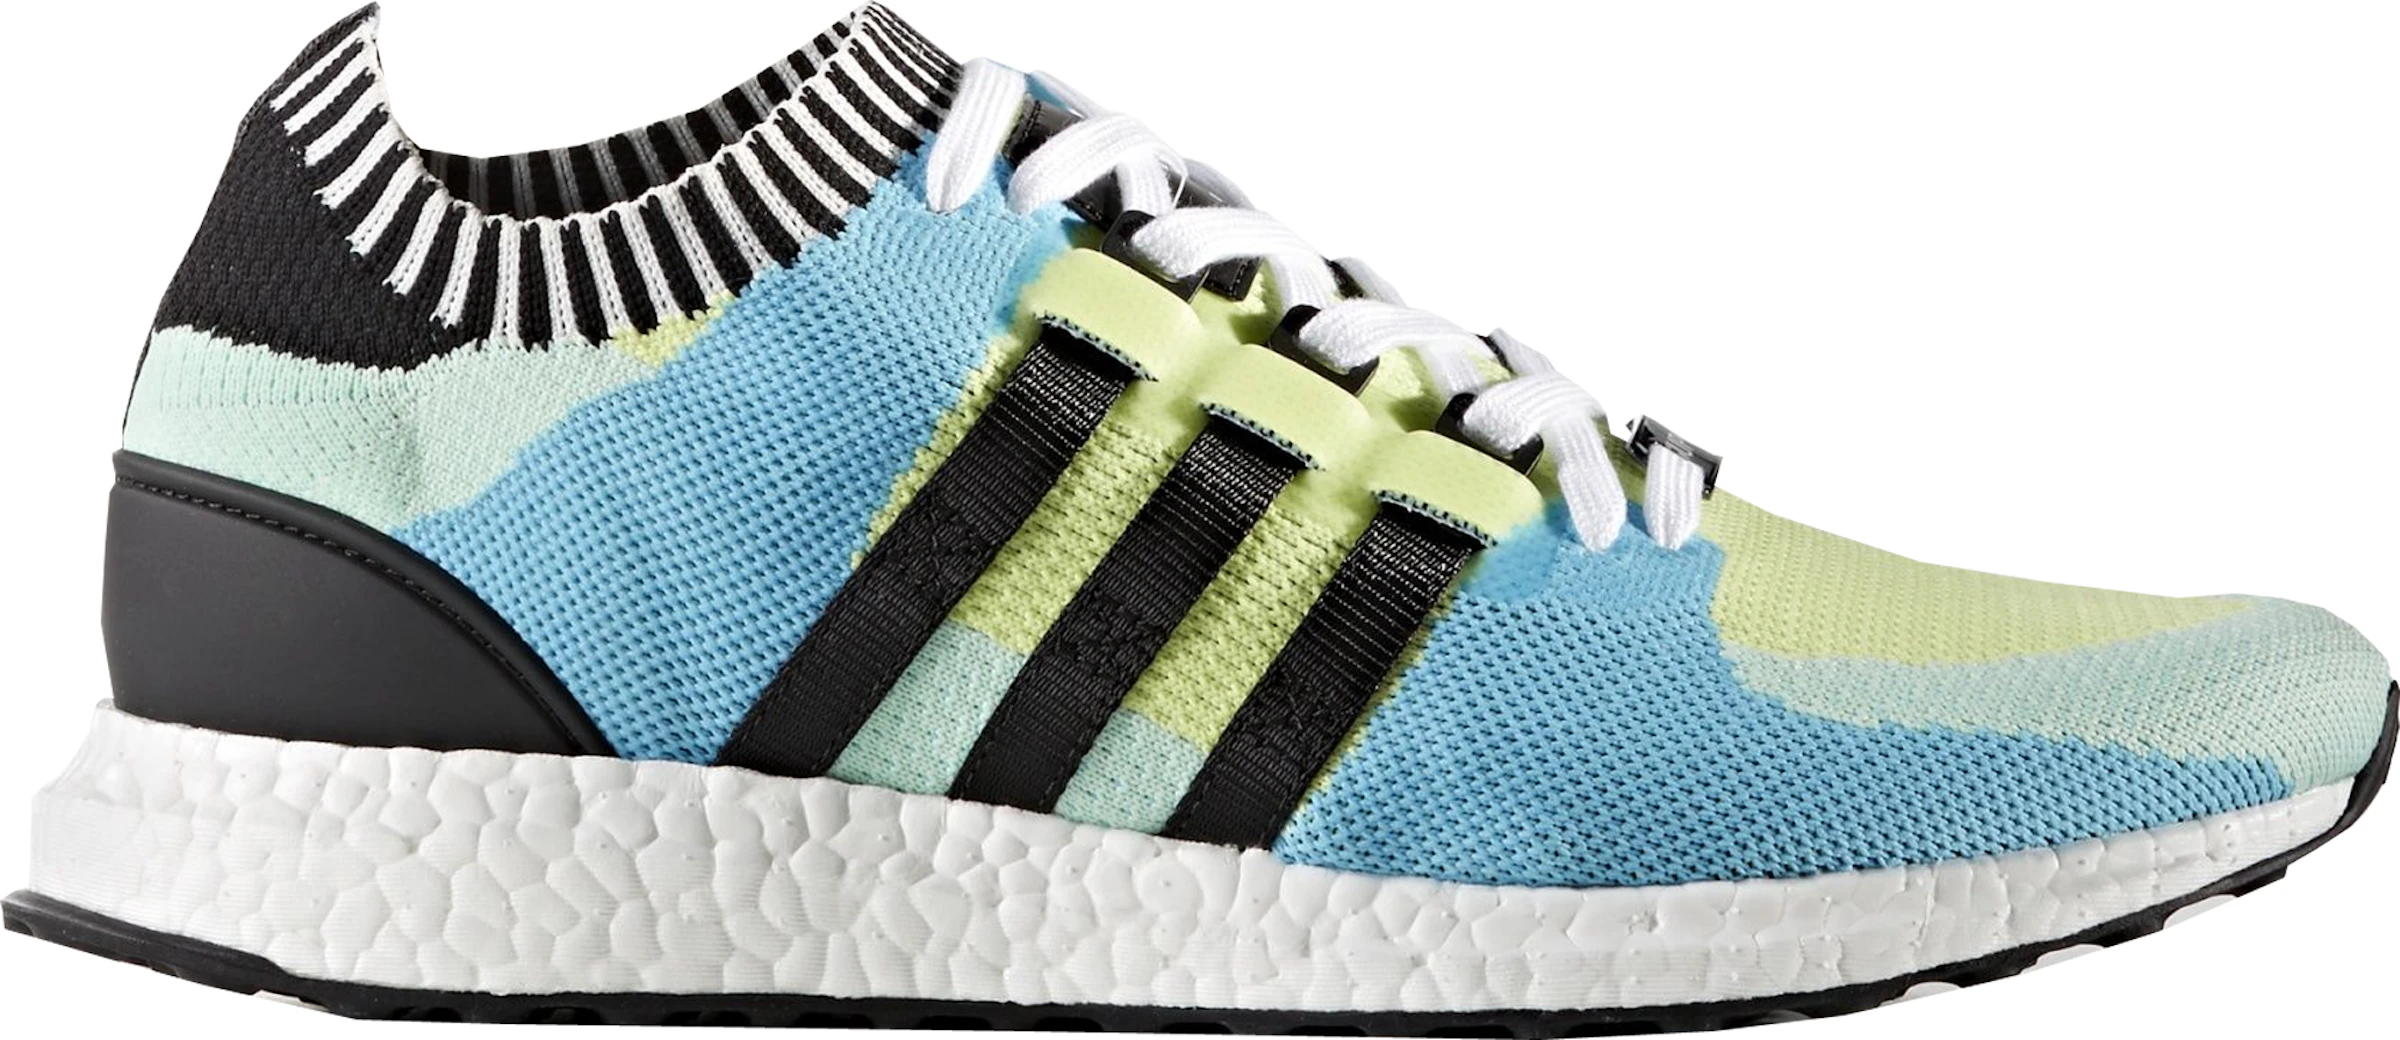 adidas EQT Support Ultra Yellow - BB1244